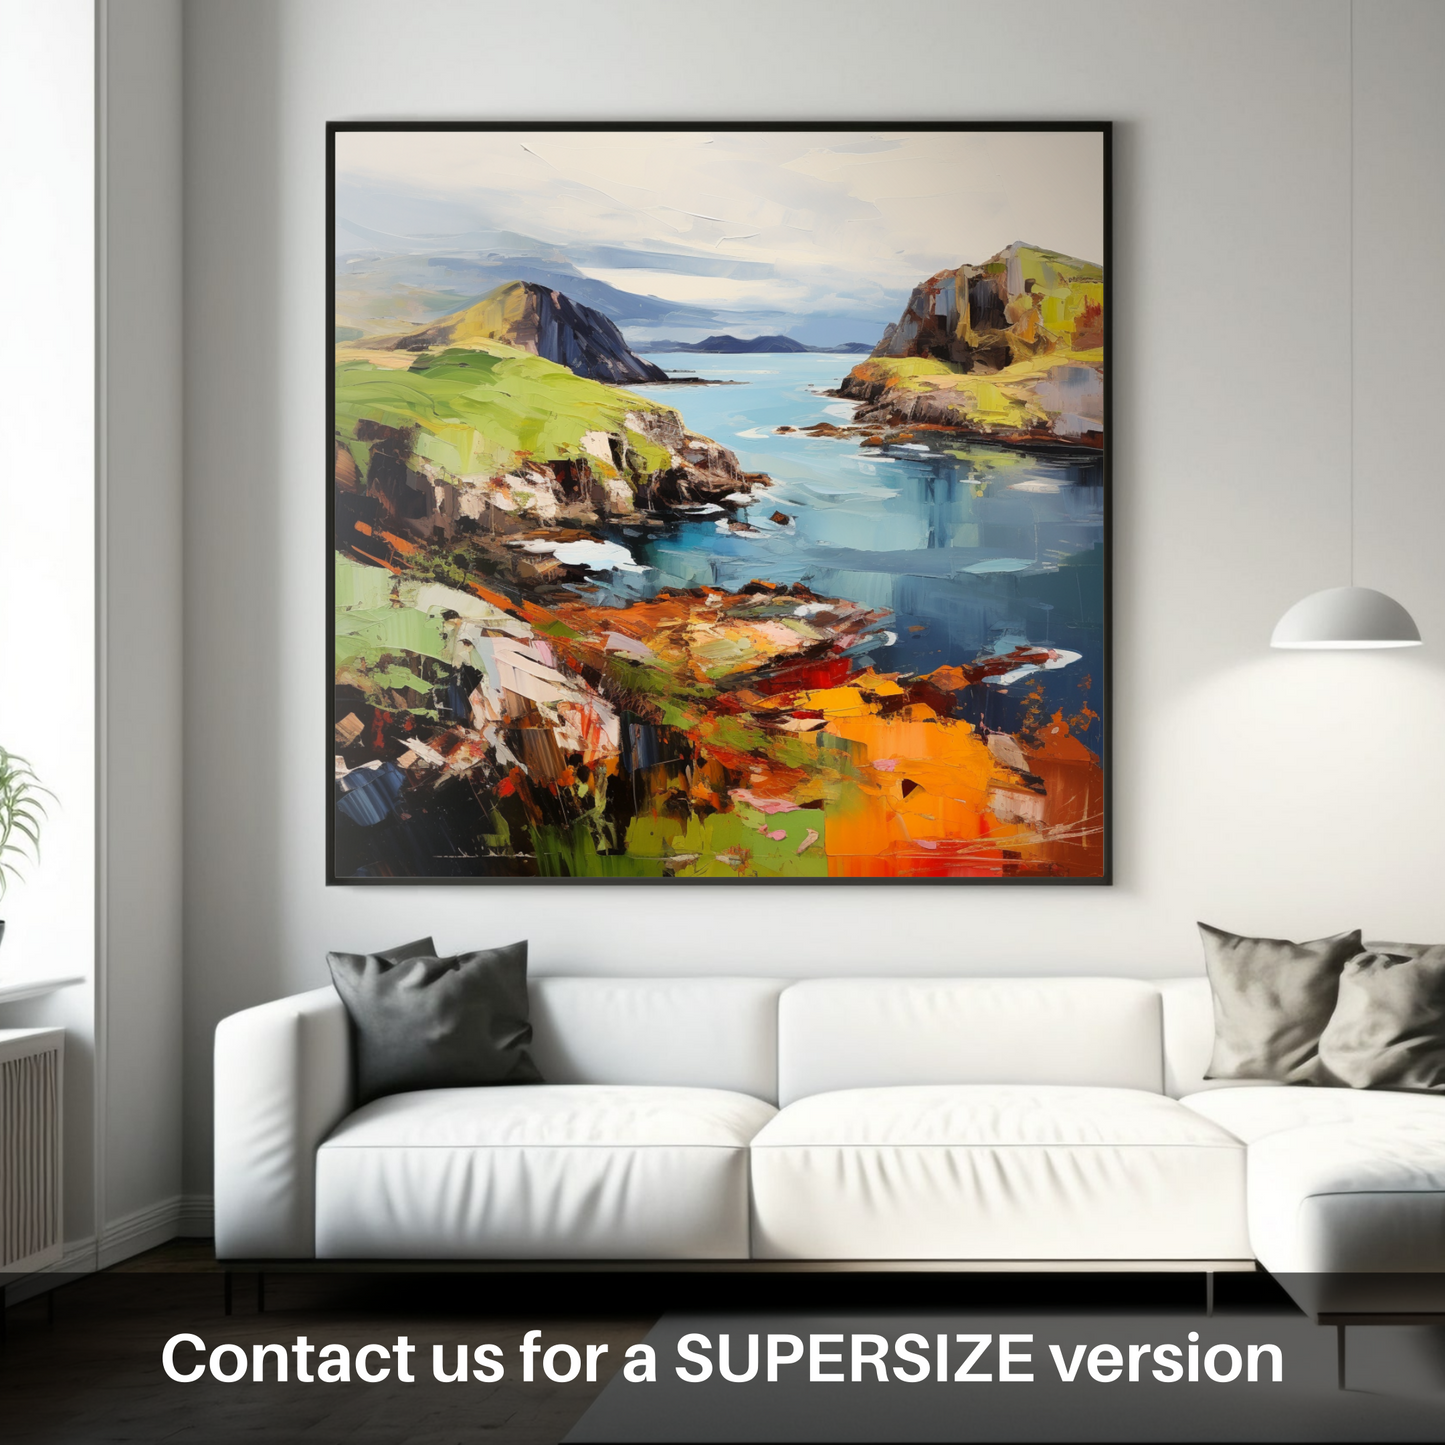 Huge supersize print of Easdale Sound, Easdale, Argyll and Bute